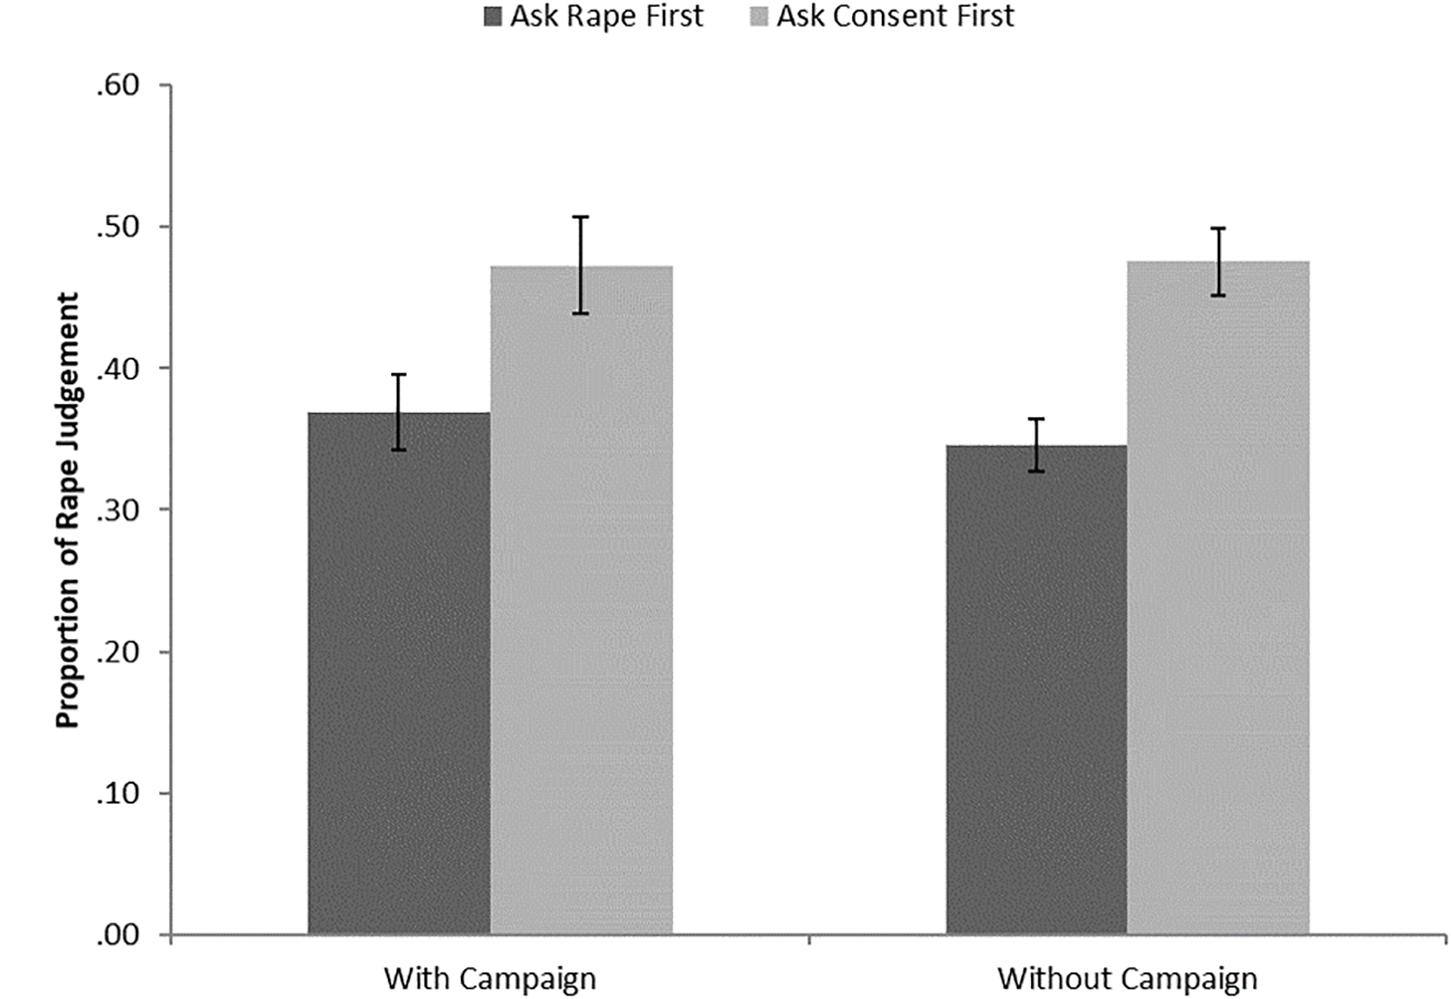 Frontiers | The Effect of Passively Viewing a Consent Campaign Video on  Attitudes Toward Rape